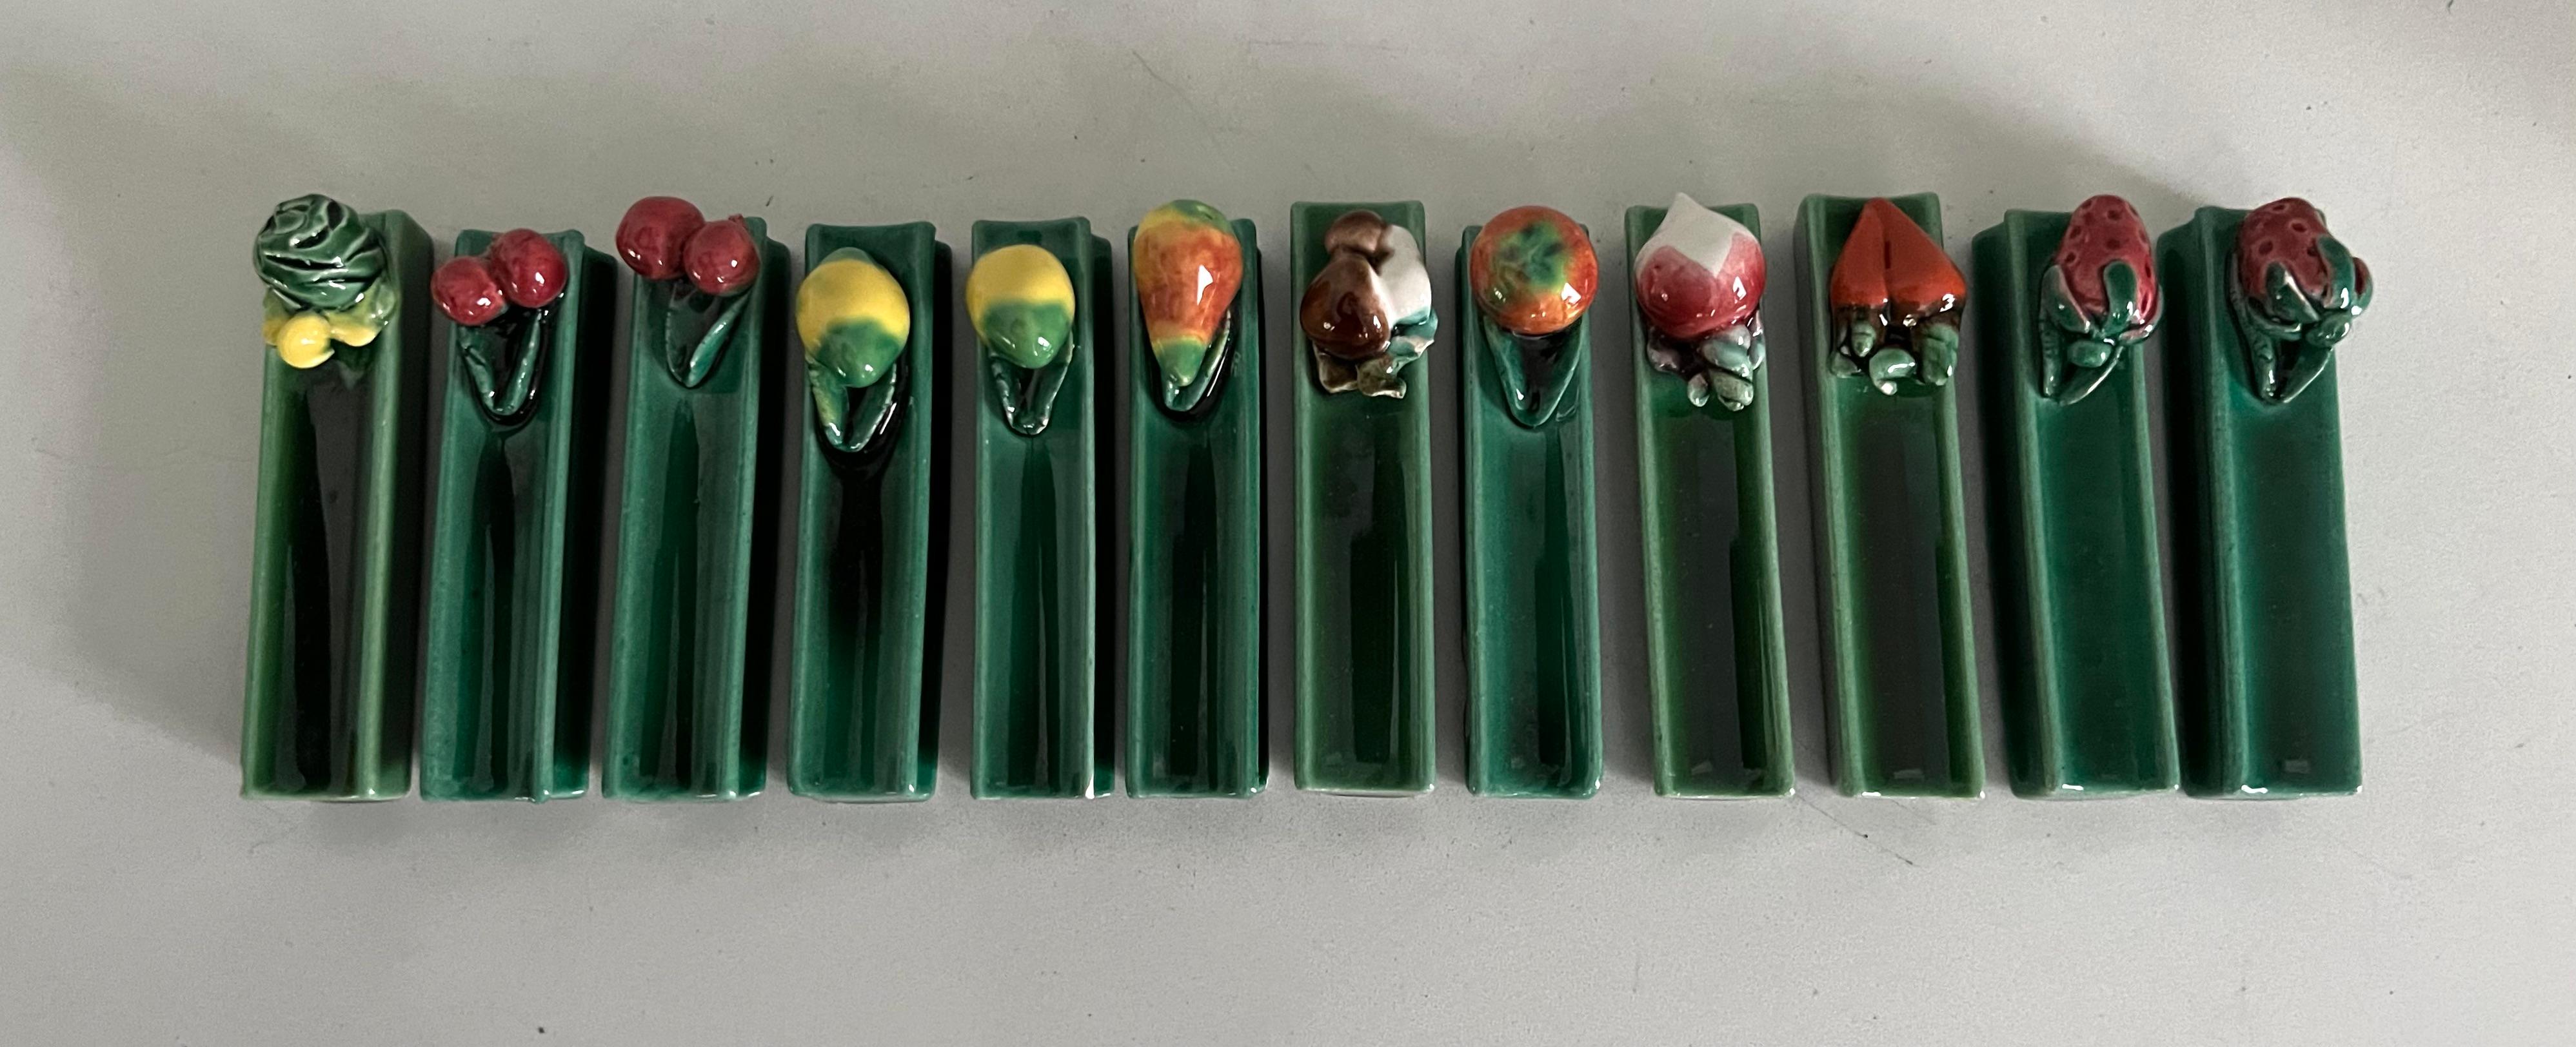 Glazed Set of 12 French Vallauris Majolica Knife Rests with Fruit and Vegetables